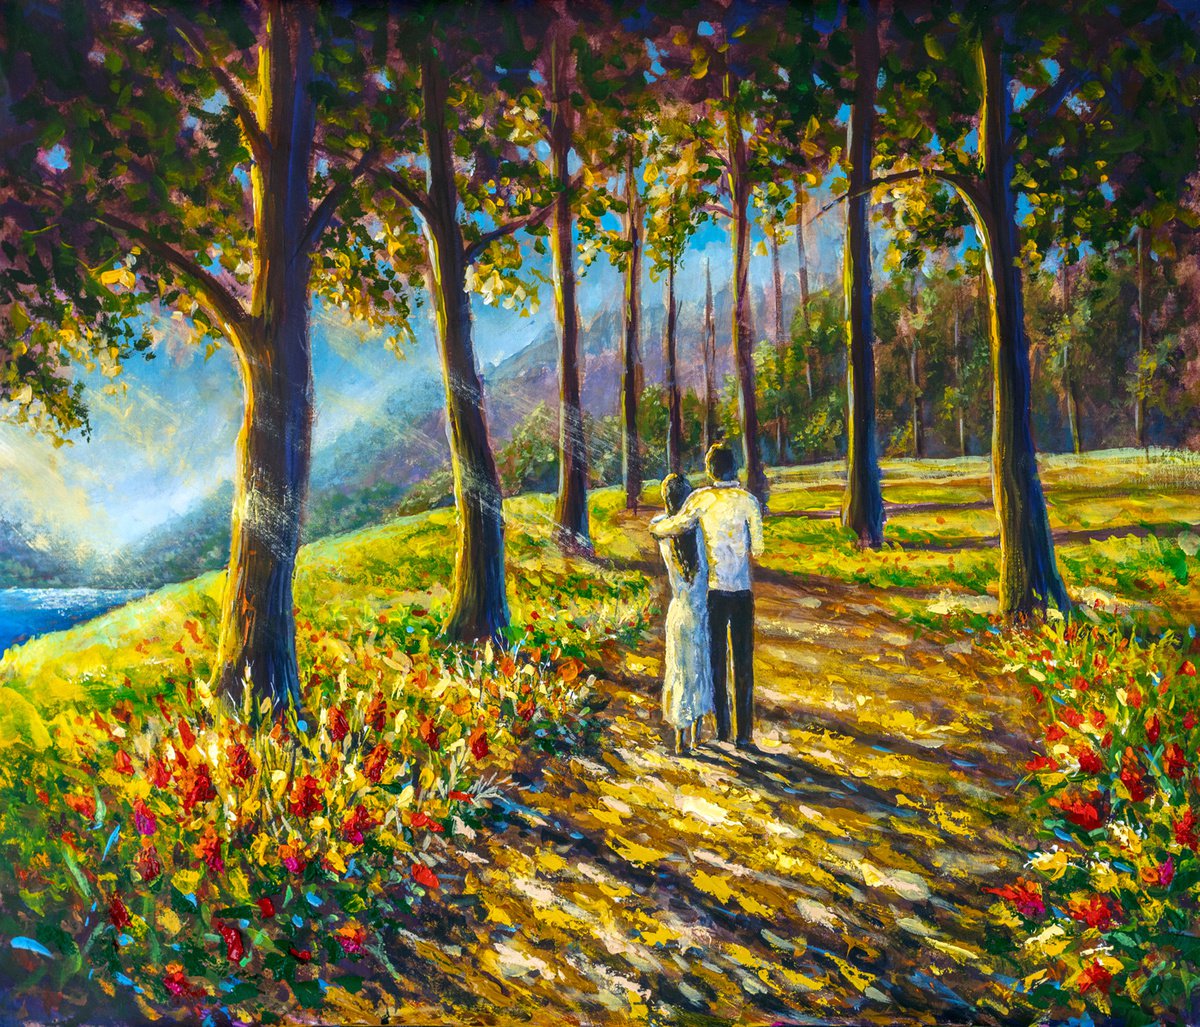 Romantic couple walking in sunny park forest painting. Painting by Valery Rybakou